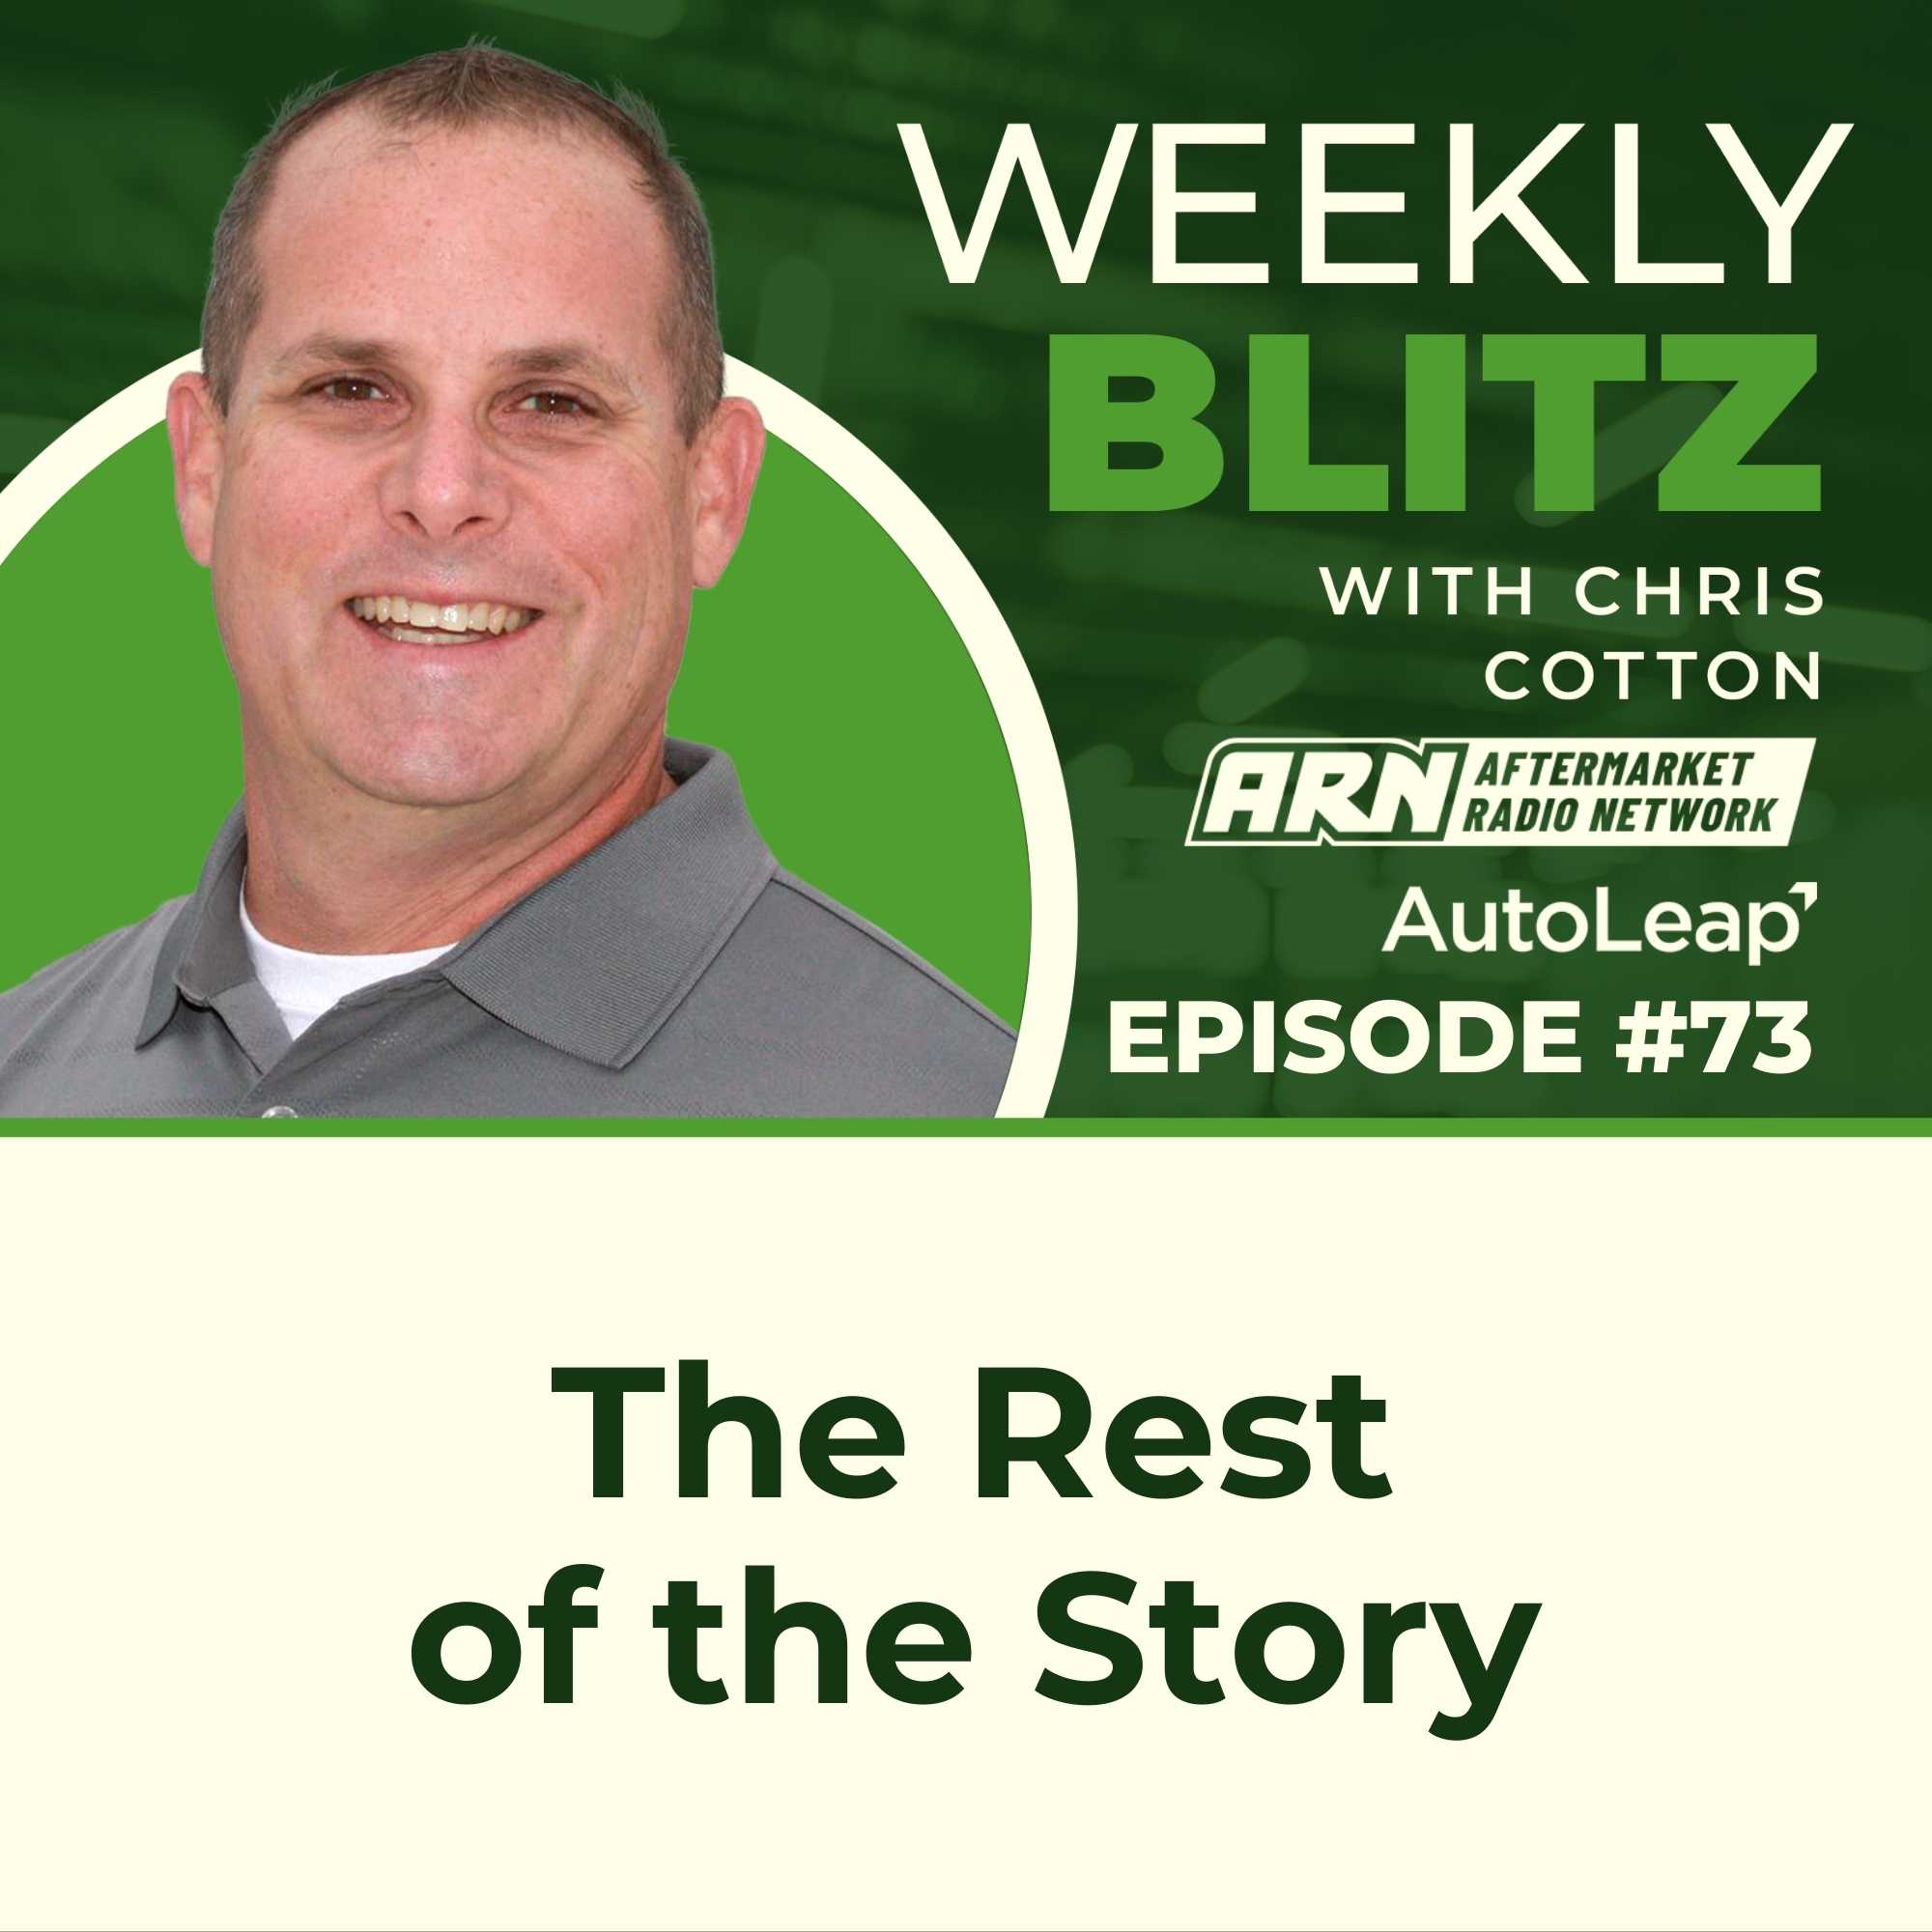 Artwork for podcast Chris Cotton Weekly Blitz